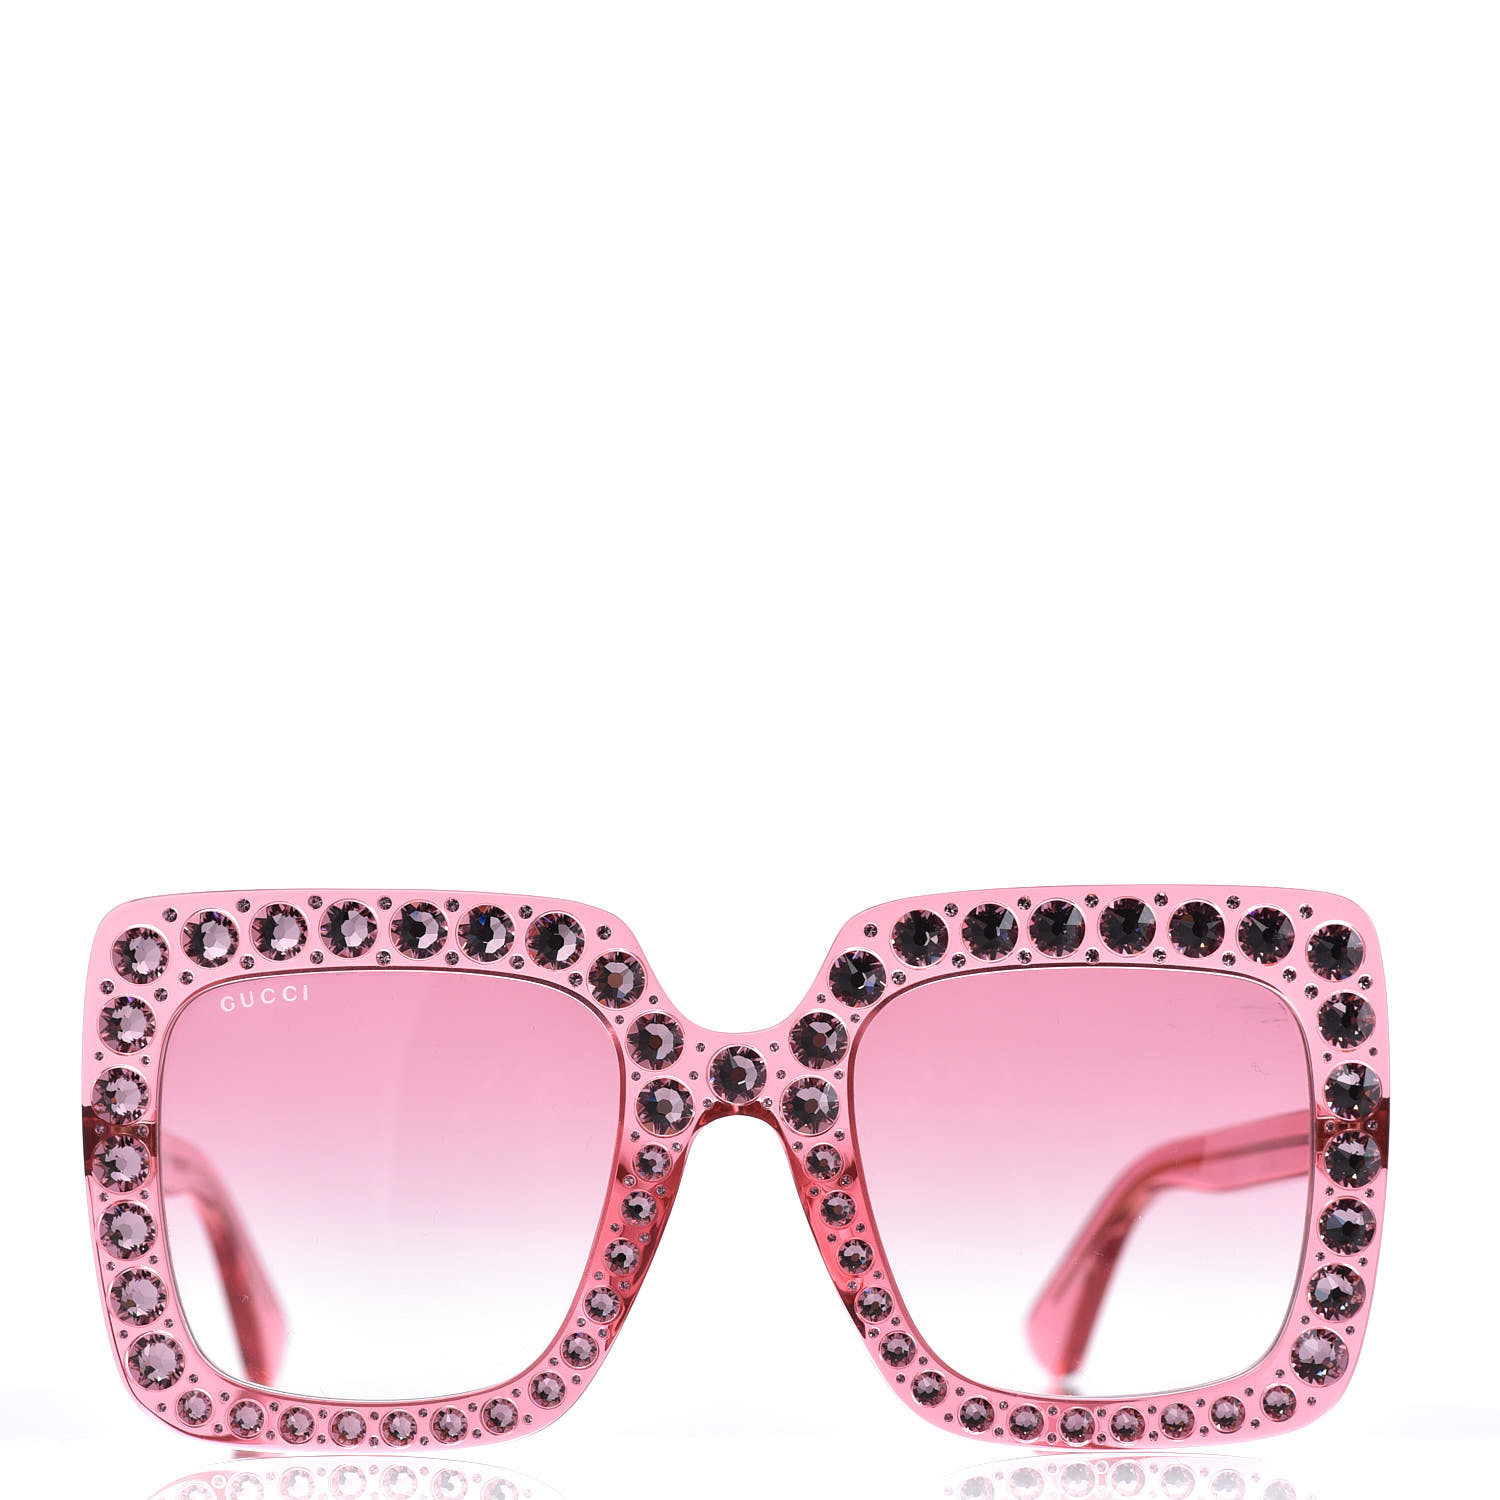 GUCCI Acetate Crystal Oversize Sunglasses GG0148S Pink 360308